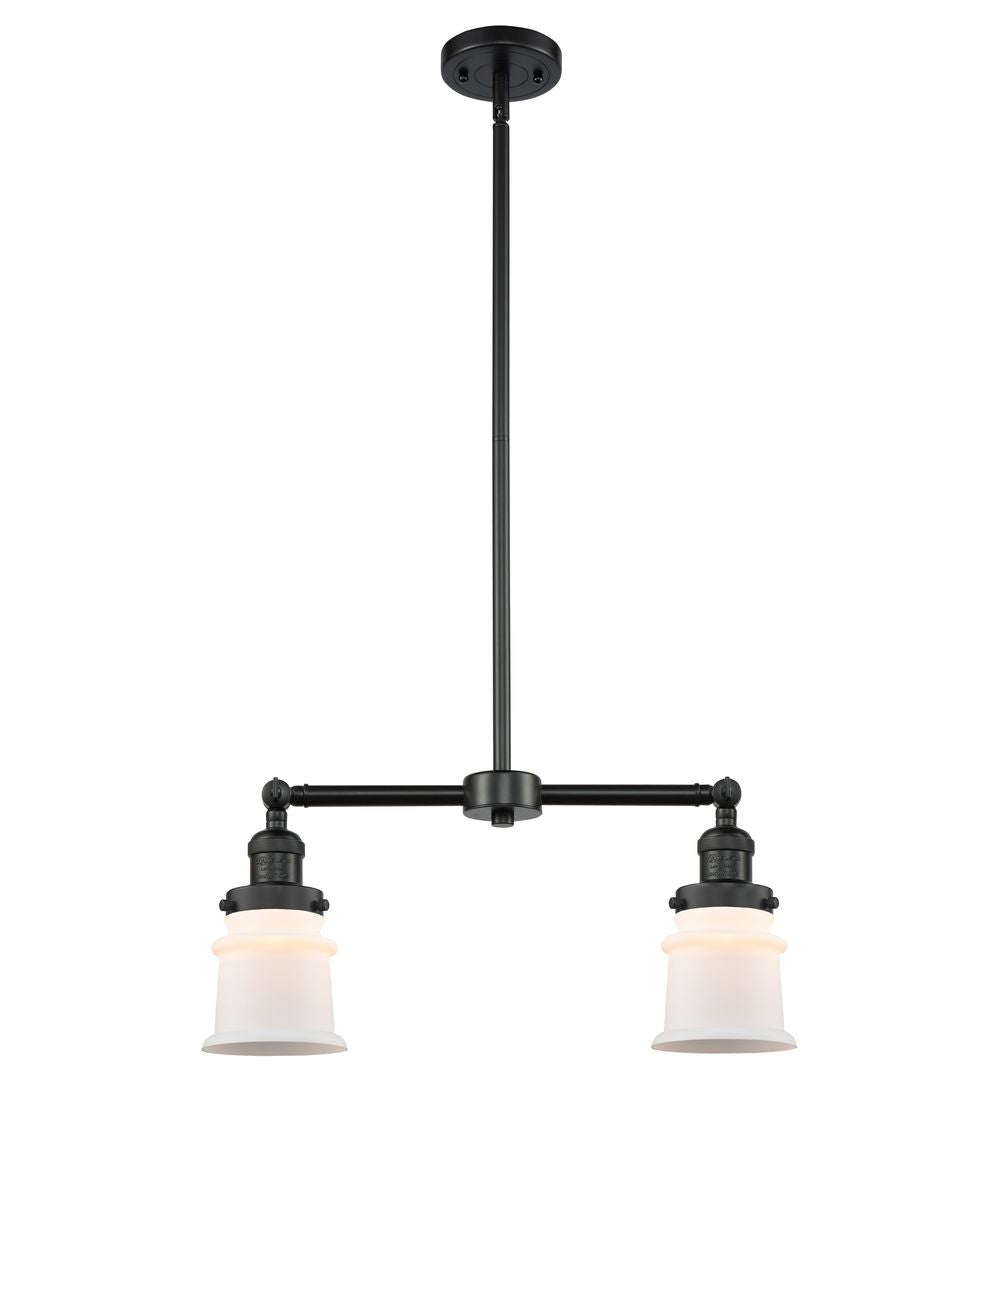 209-BK-G181S 2-Light 21" Matte Black Island Light - Matte White Small Canton Glass - LED Bulb - Dimmensions: 21 x 5 x 10<br>Minimum Height : 20.625<br>Maximum Height : 44.625 - Sloped Ceiling Compatible: Yes